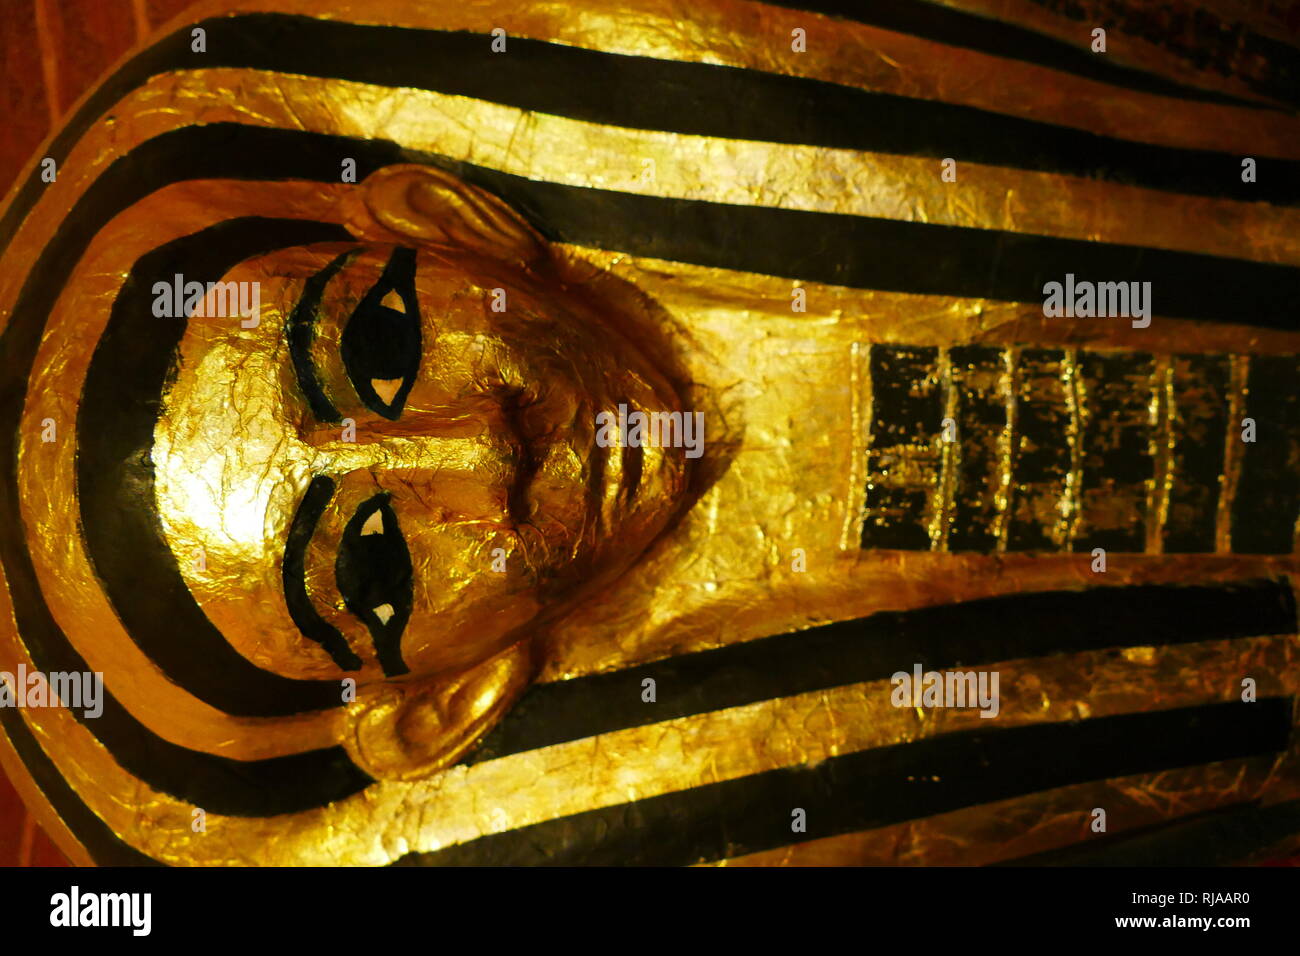 Replica of a gilded ancient Egyptian coffin; 18th dynasty. In 1896 a tomb was discovered in Sheikh Abd el Qurna; by Georges Daressy. The tomb belonged to Hatiay and his wife Henut-Wedjebu. The tomb dates to the time of Amenhotep III and Akhenaten. Henut-Wedjebu was a lady of the house and songstress of Amun. Stock Photo